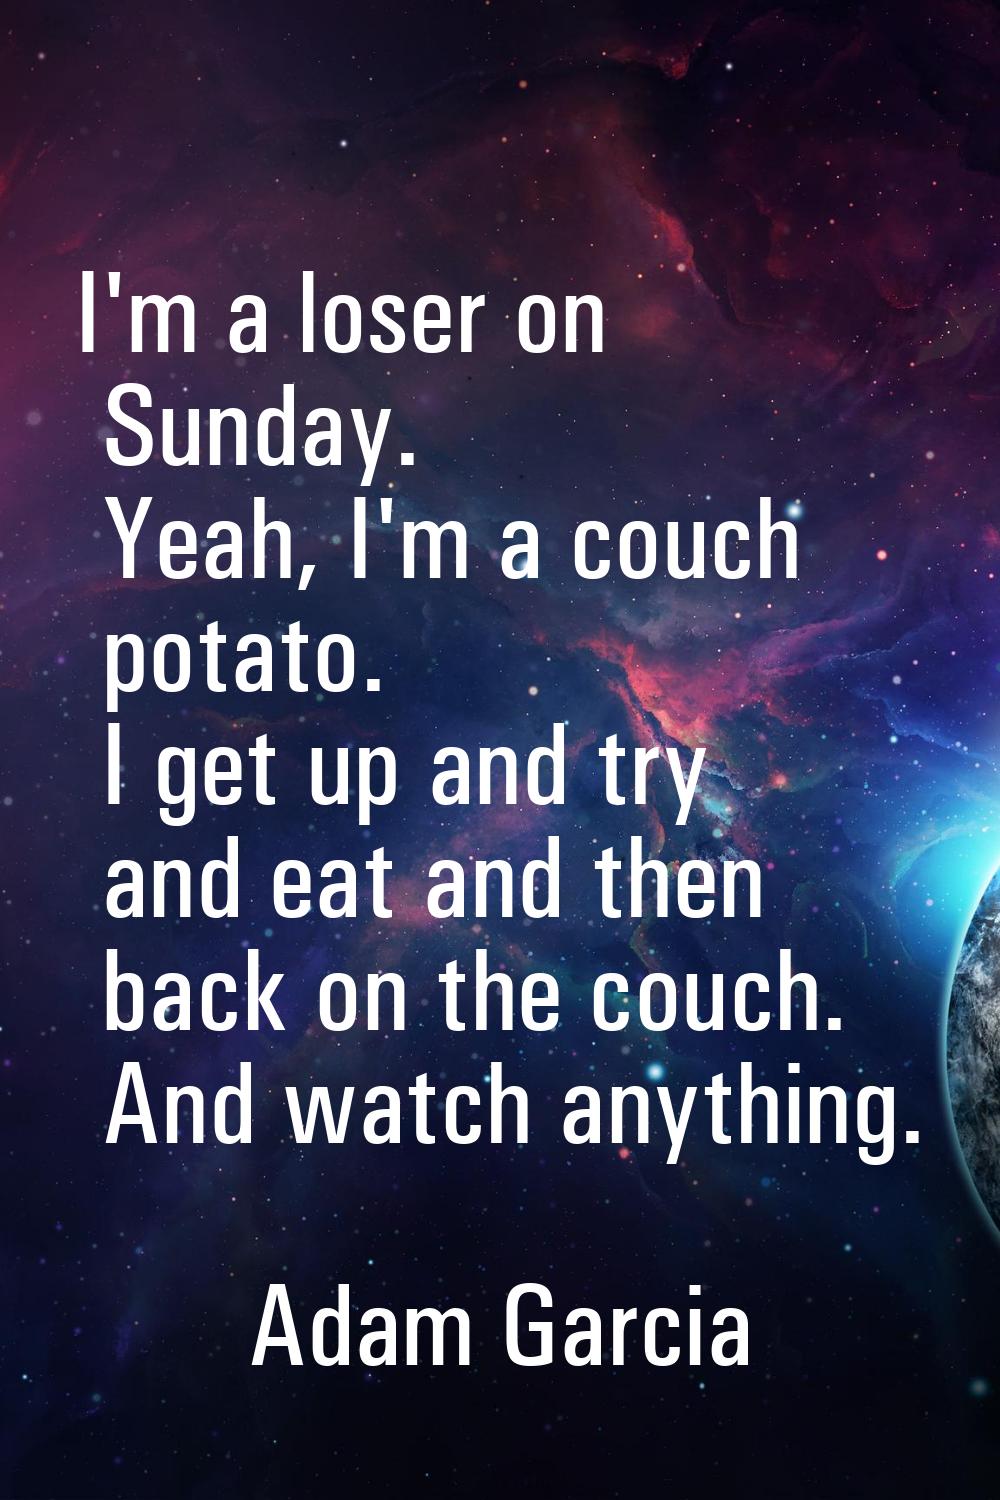 I'm a loser on Sunday. Yeah, I'm a couch potato. I get up and try and eat and then back on the couc